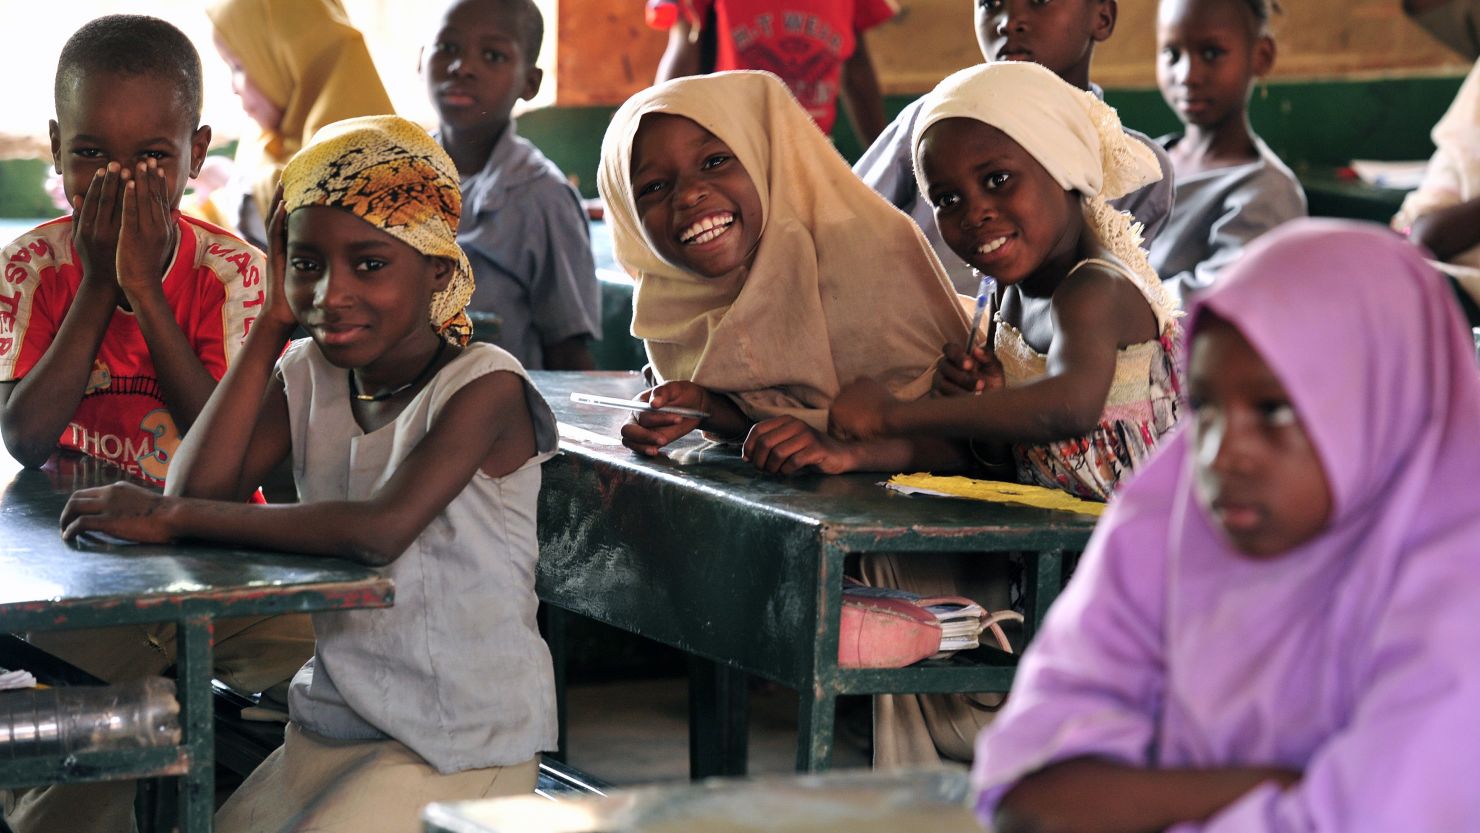 Children pose in a classroom at the Friendship Primary school in Zinder on June 1, 2012. 